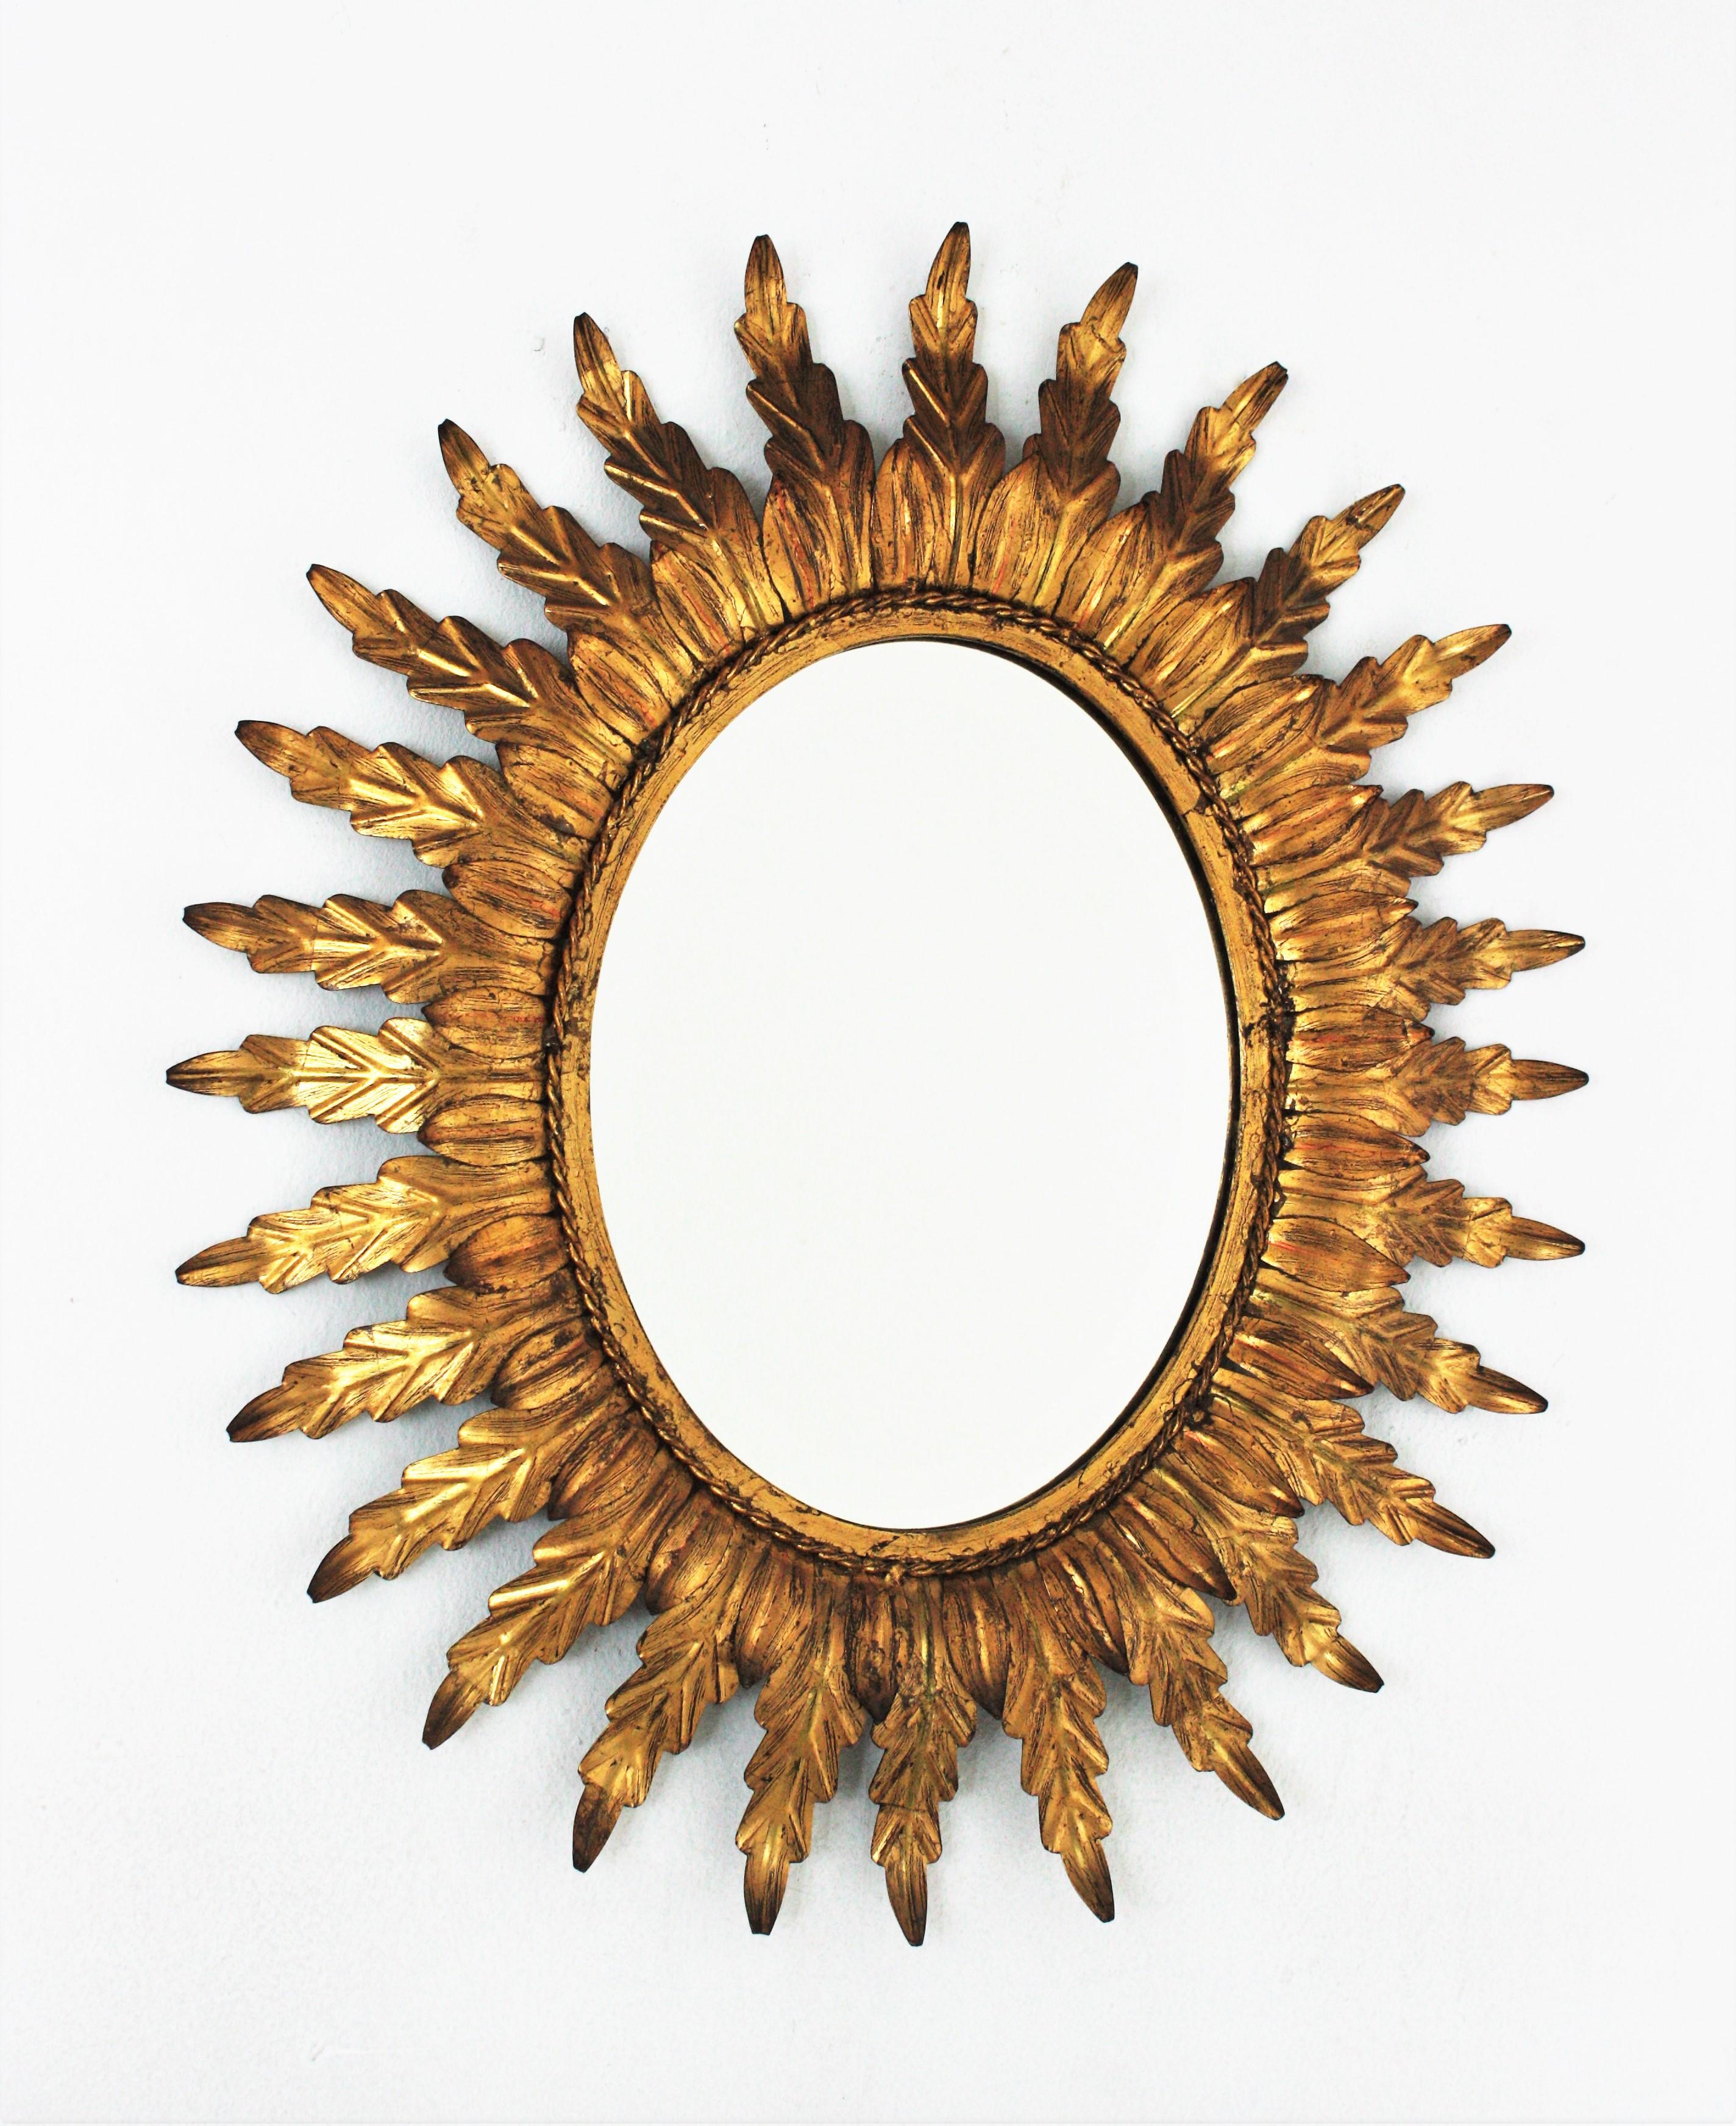 Oval leafed sunburst mirror, gilt iron, gold leaf. France, 1960s.
Hollywood Regency sunburst oval mirror in gilt metal with double leafed frame. The frame is comprised by a layer of small leaves and a twisted iron rope surrounding the glass and